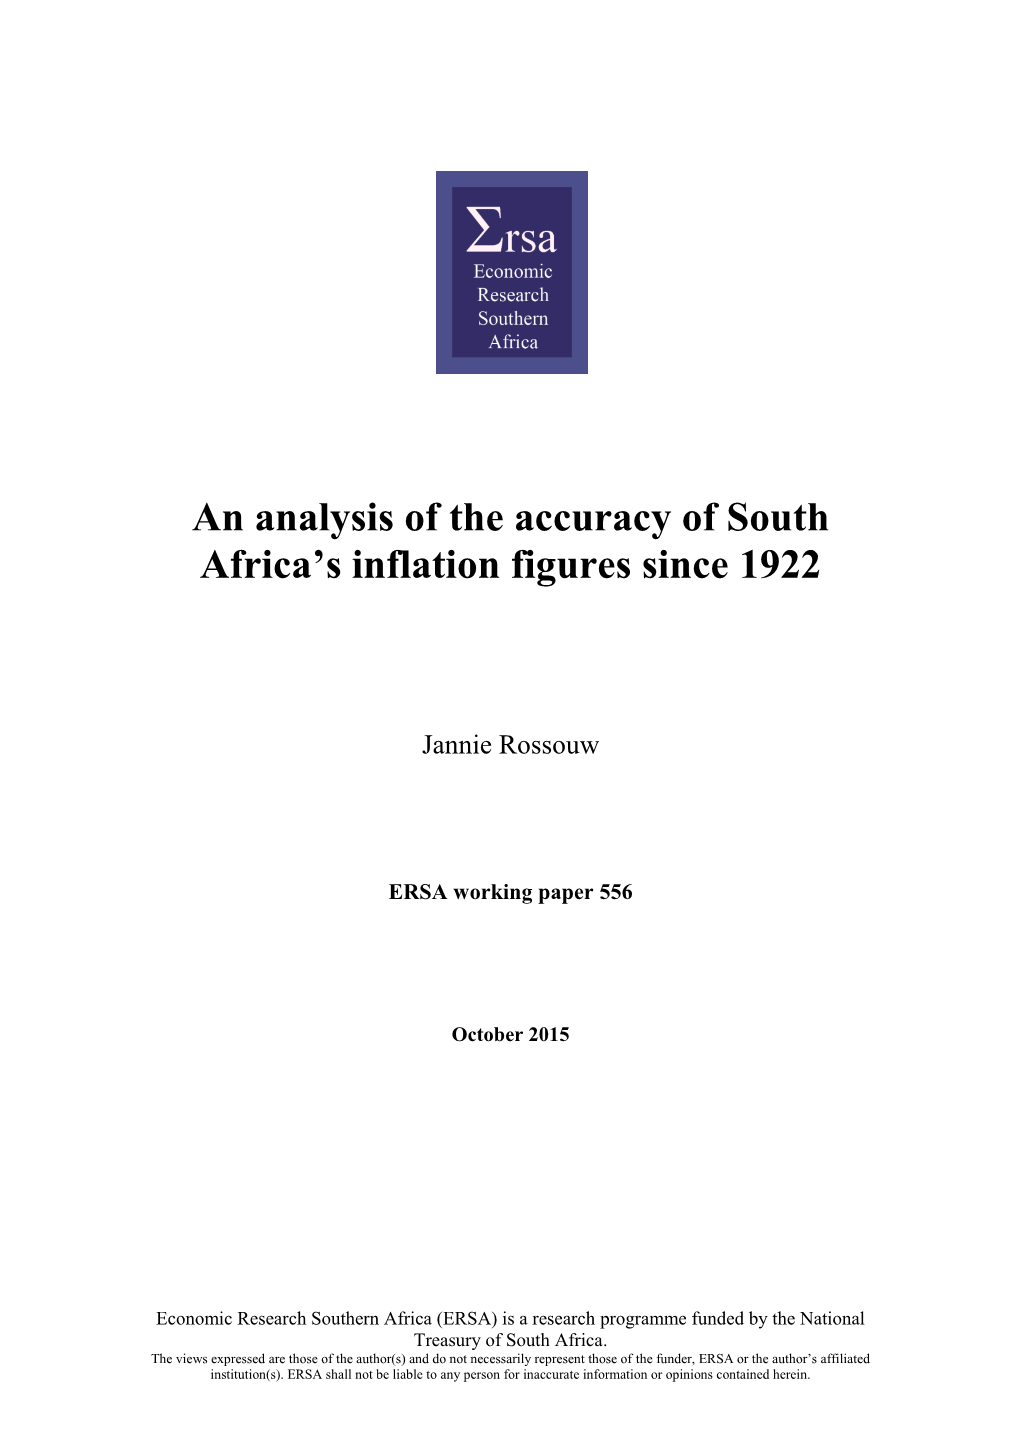 An Analysis of the Accuracy of South Africa's Inflation Figures Since 1922